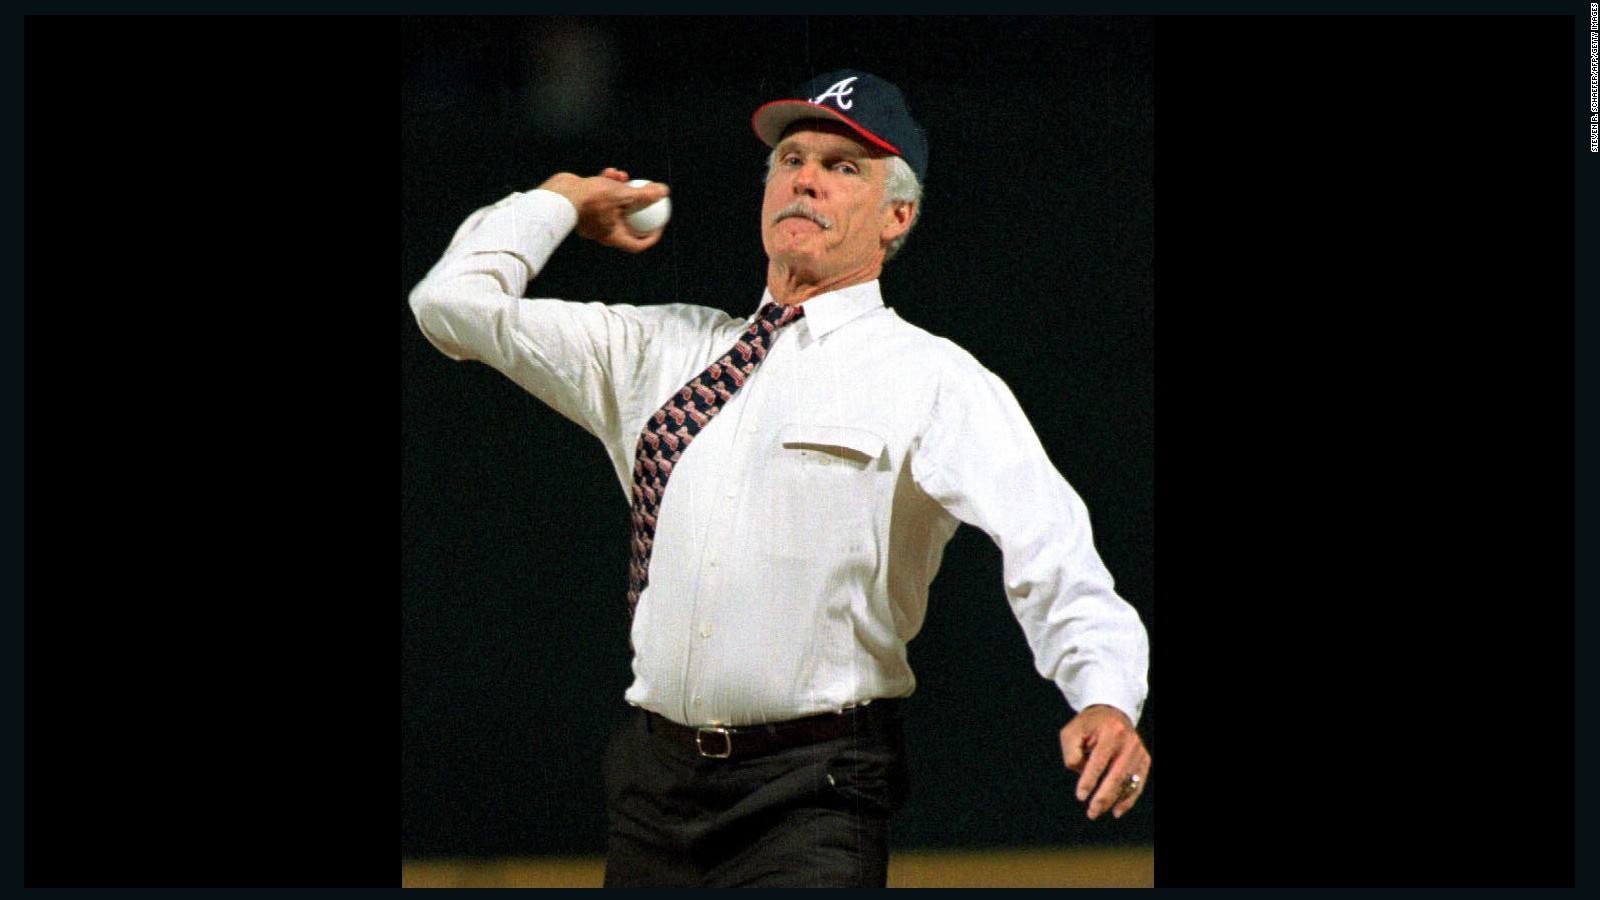 Ted Turner blamed for bod MLB pitching contract